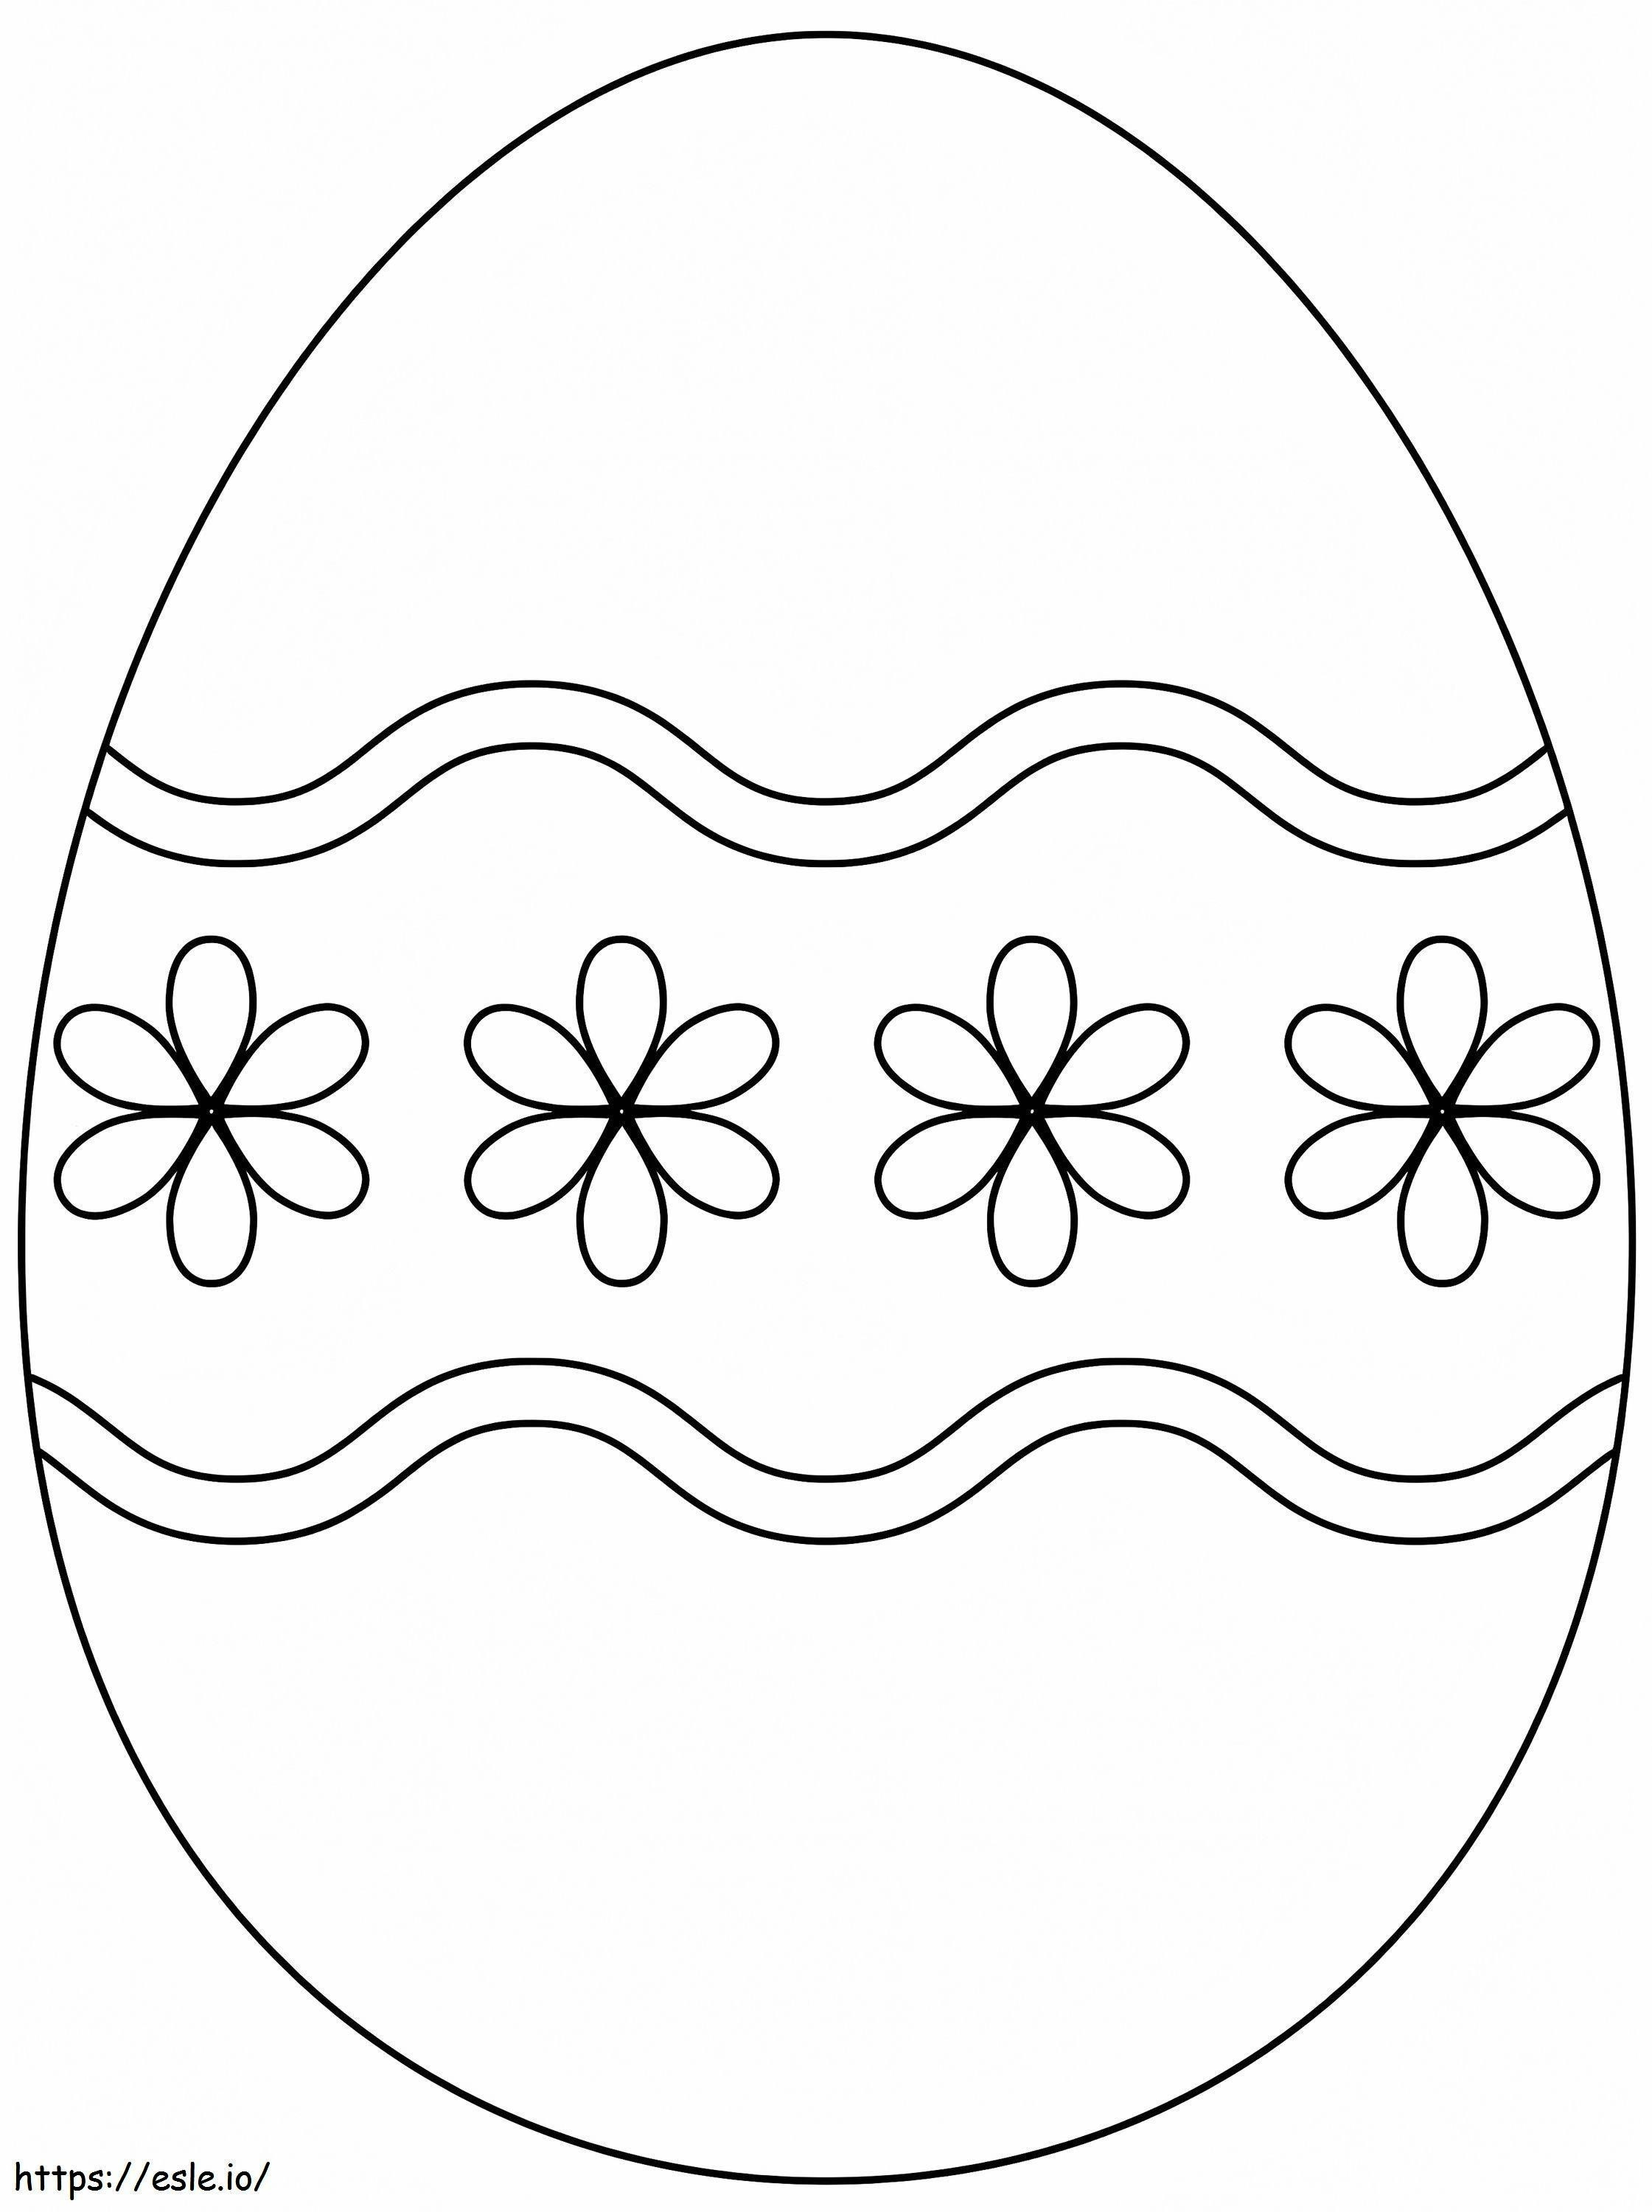 Pretty Easter Egg 1 coloring page